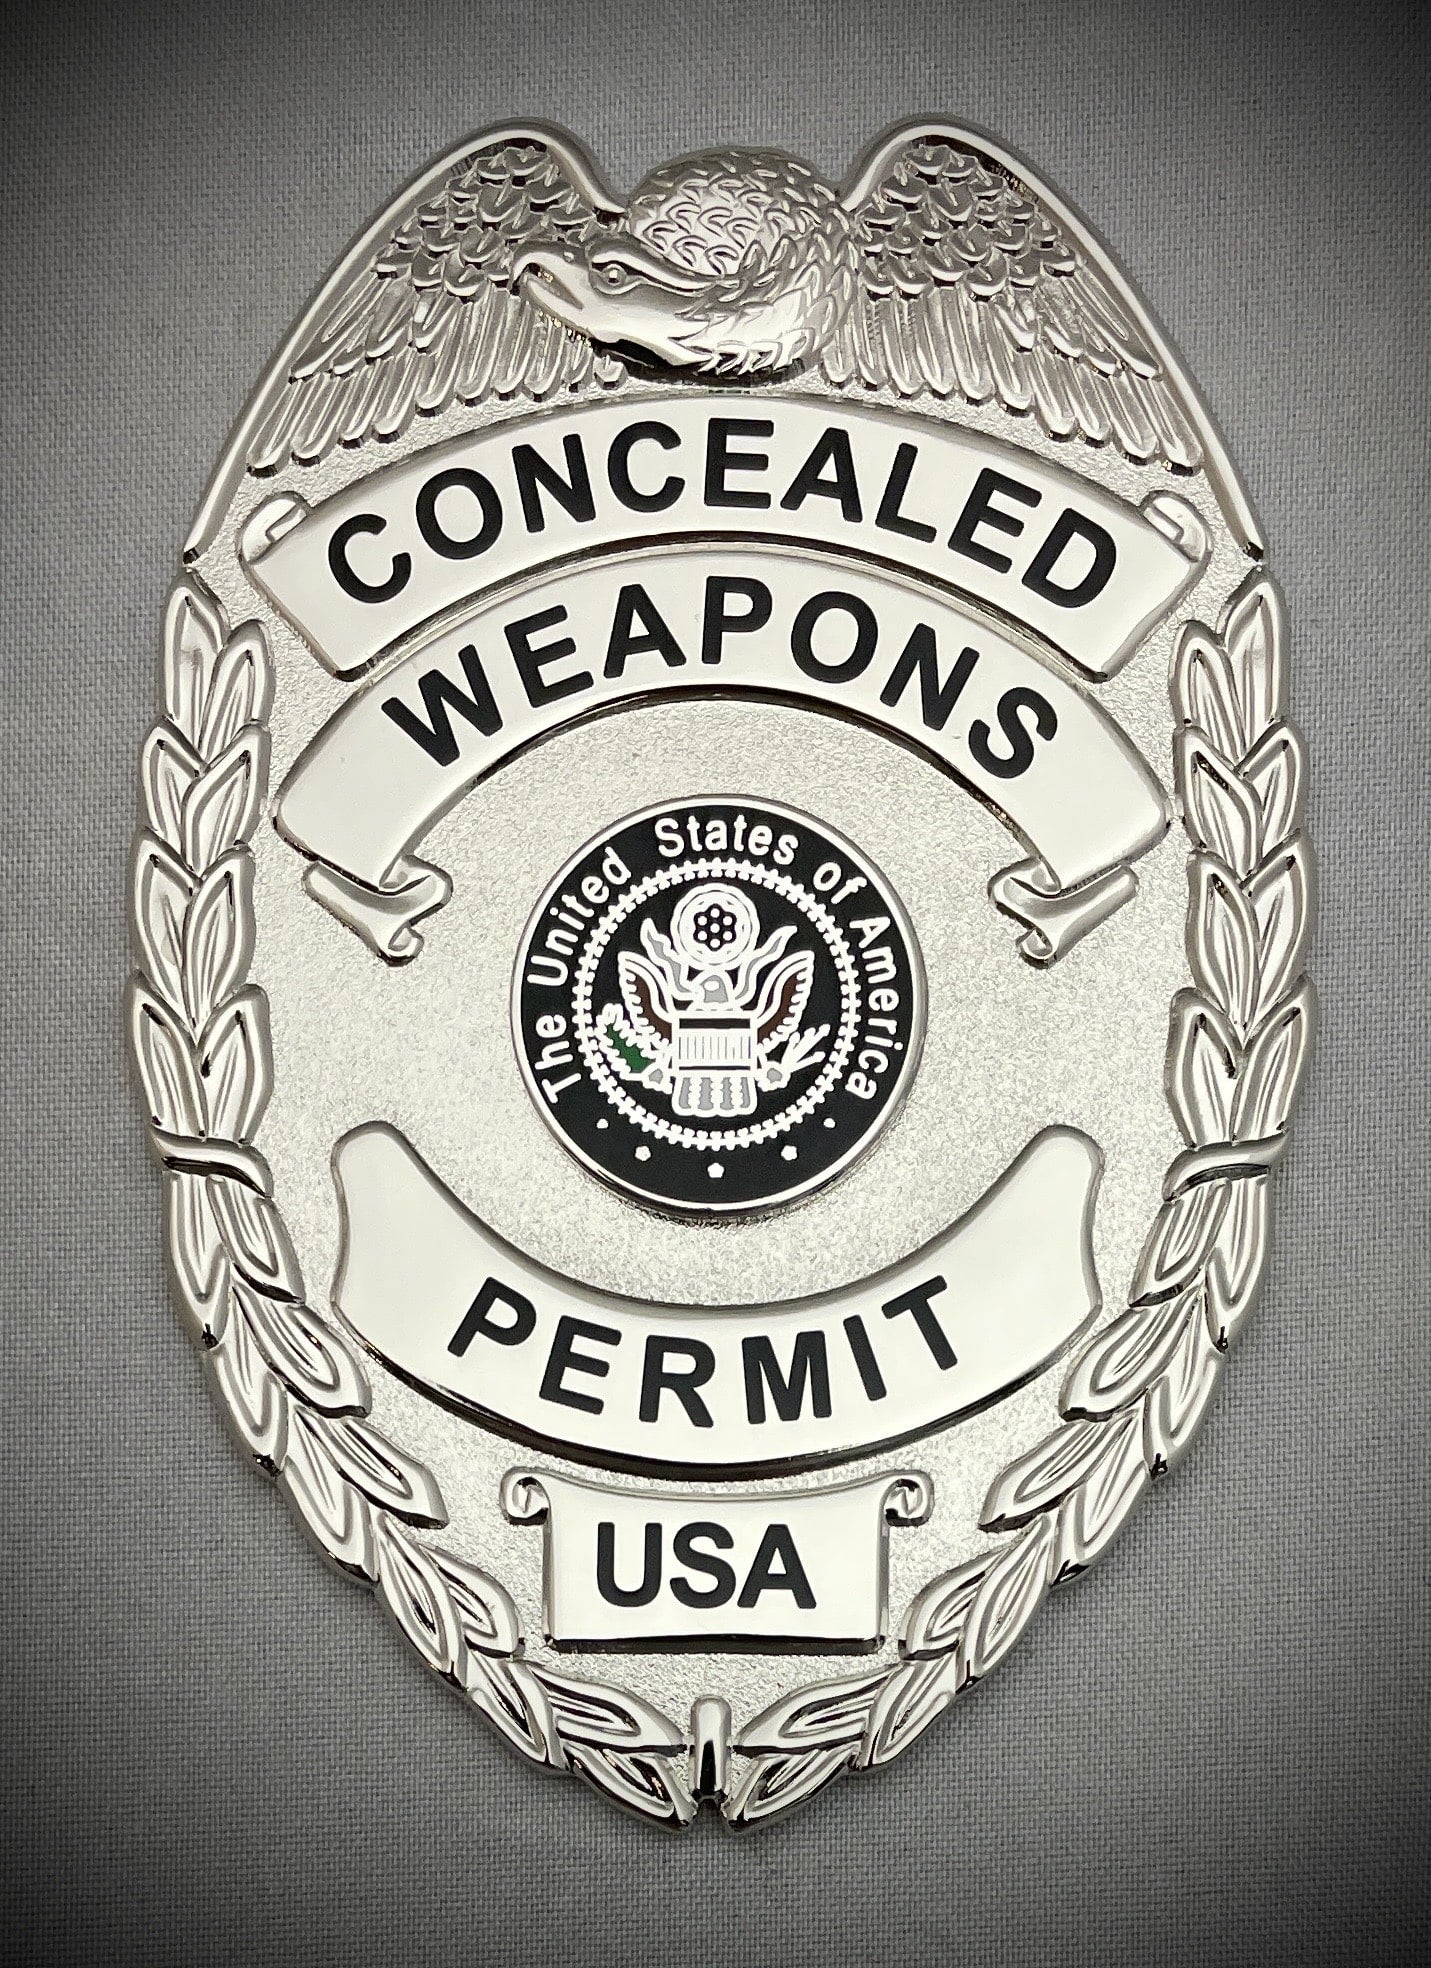 Concealed Weapons Permit Badge